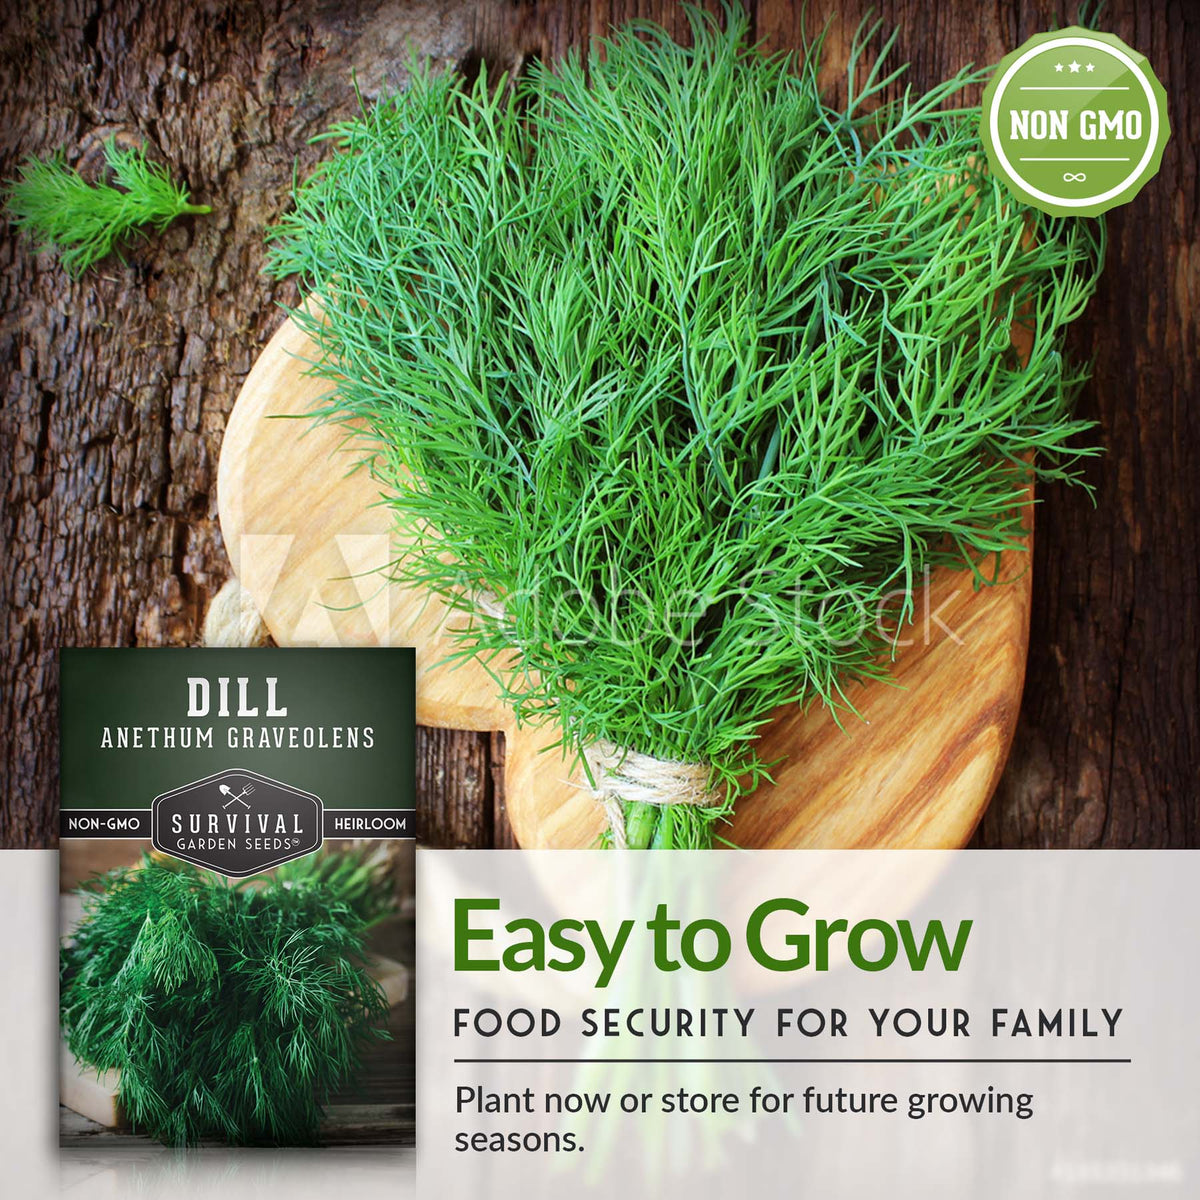 Dill is easy to grow